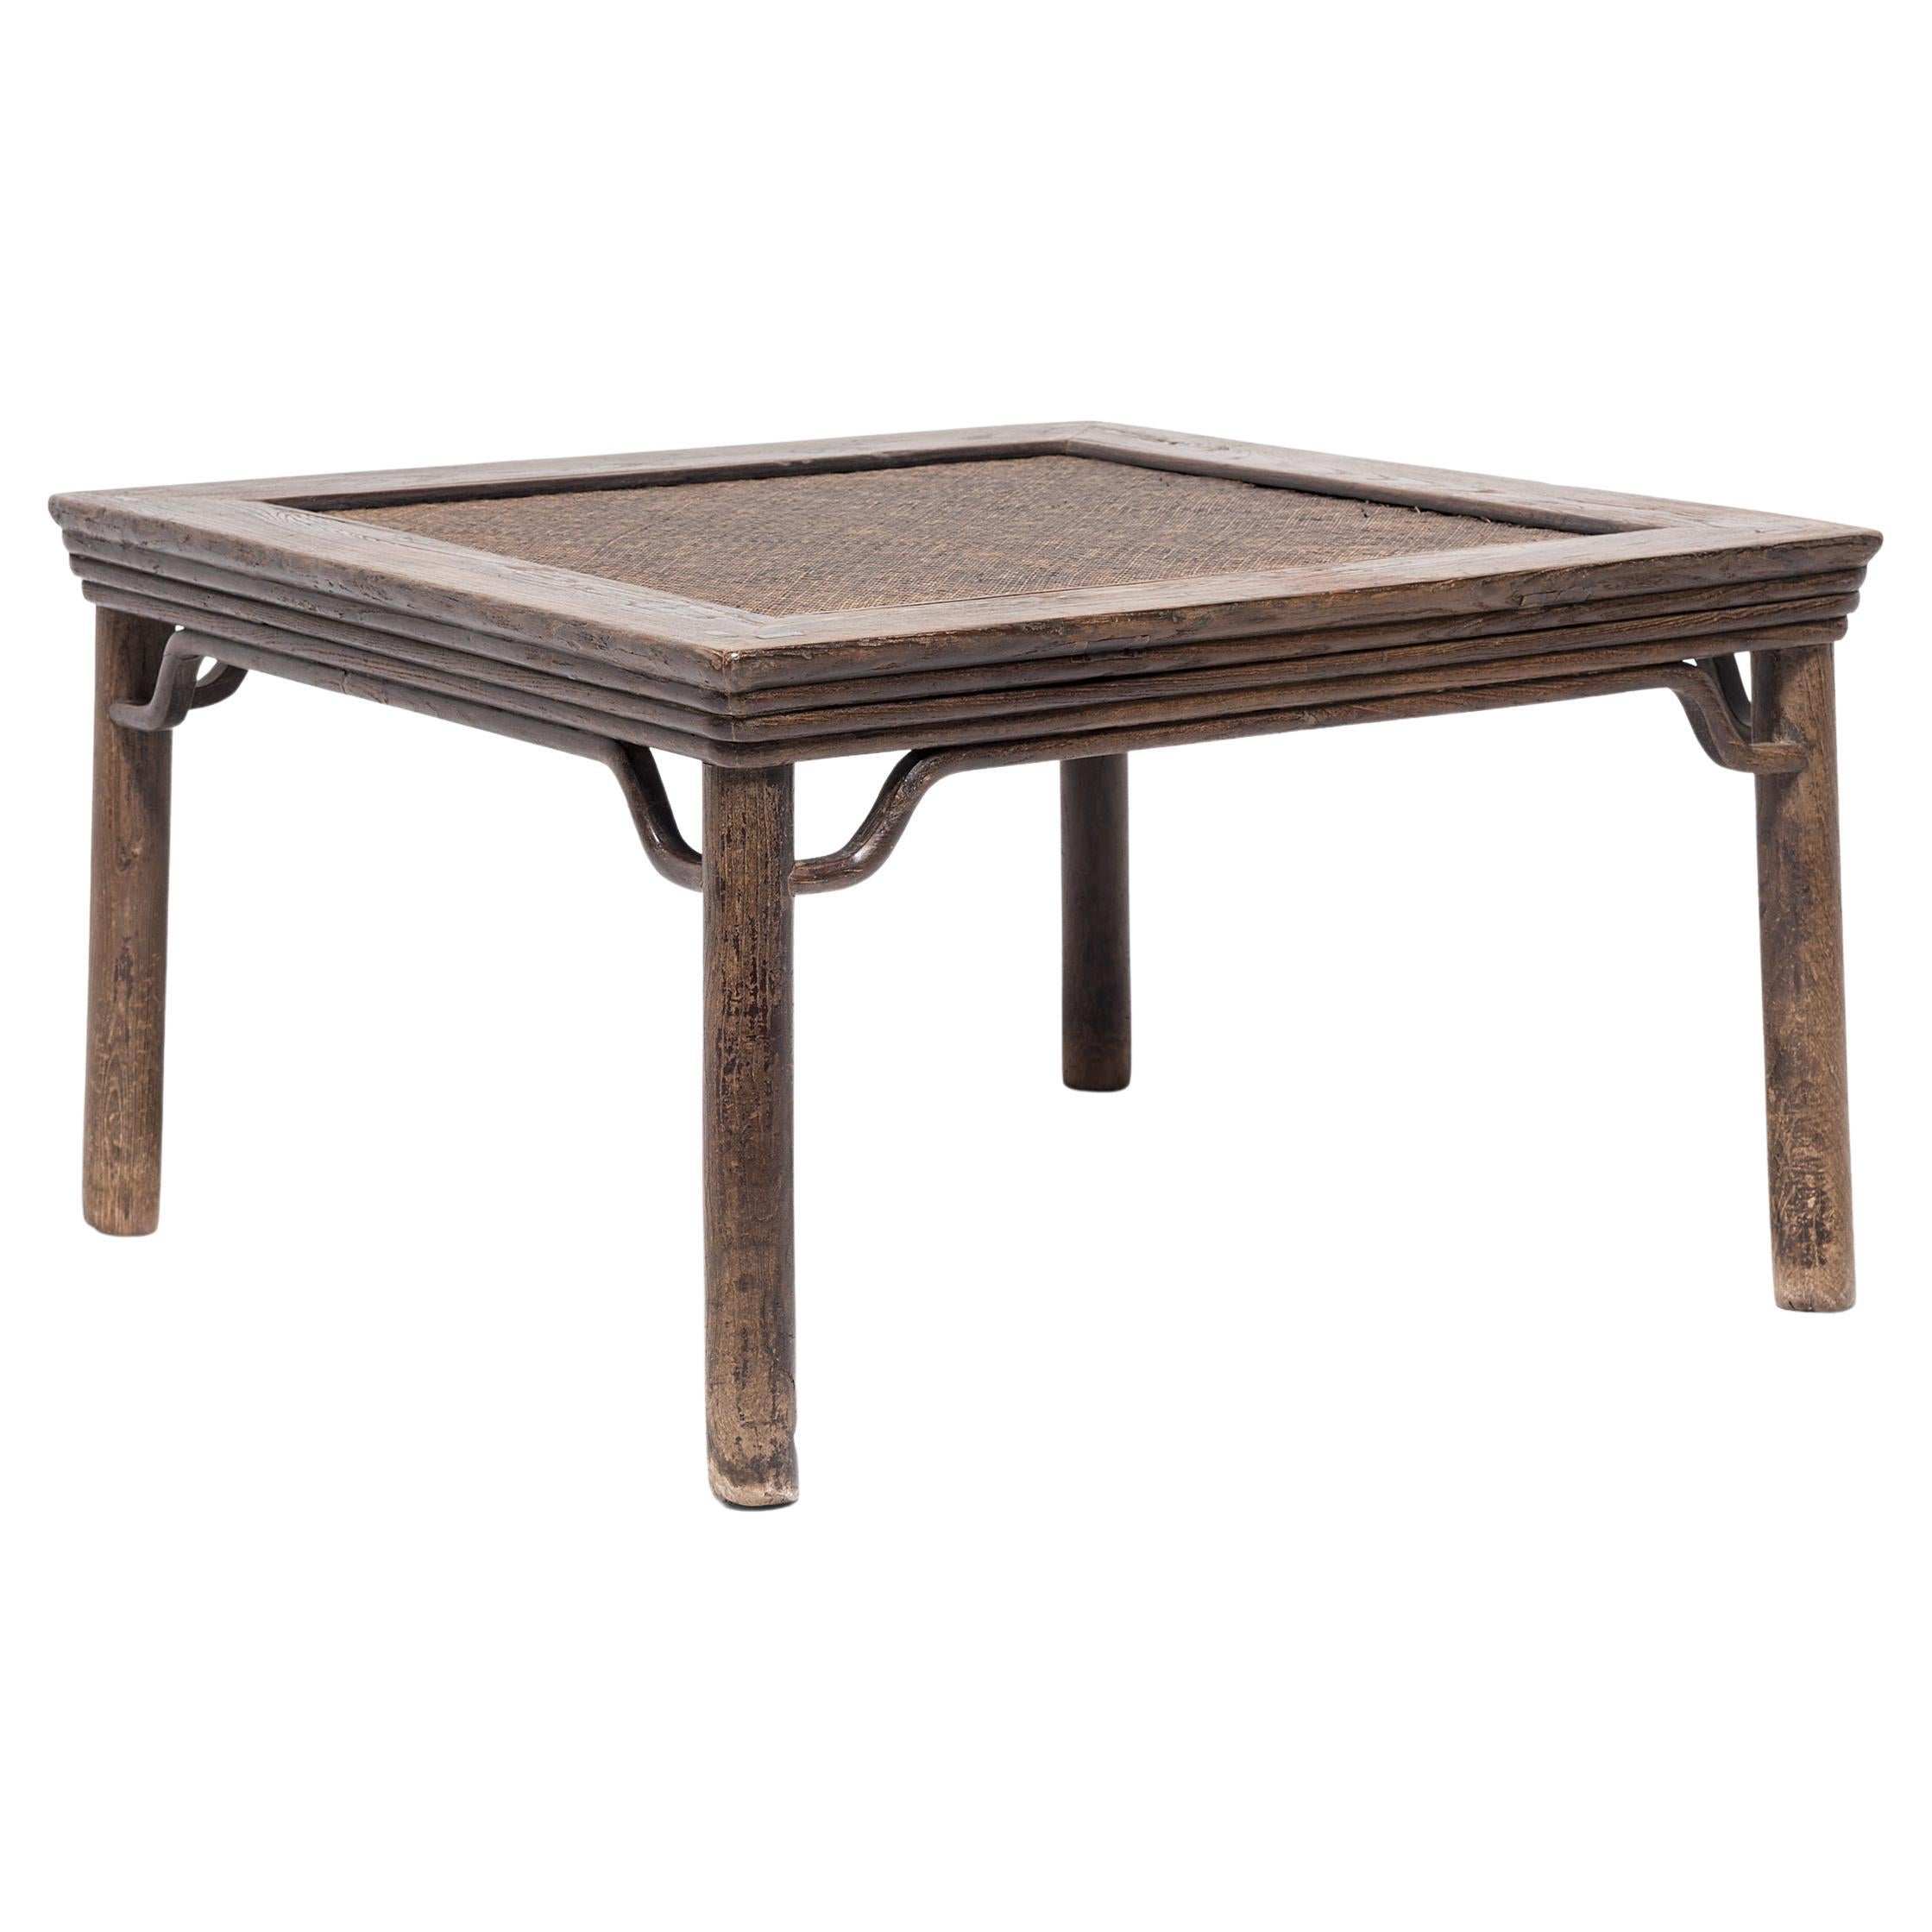 Chinese Woven Top Square Table, c. 1900 For Sale